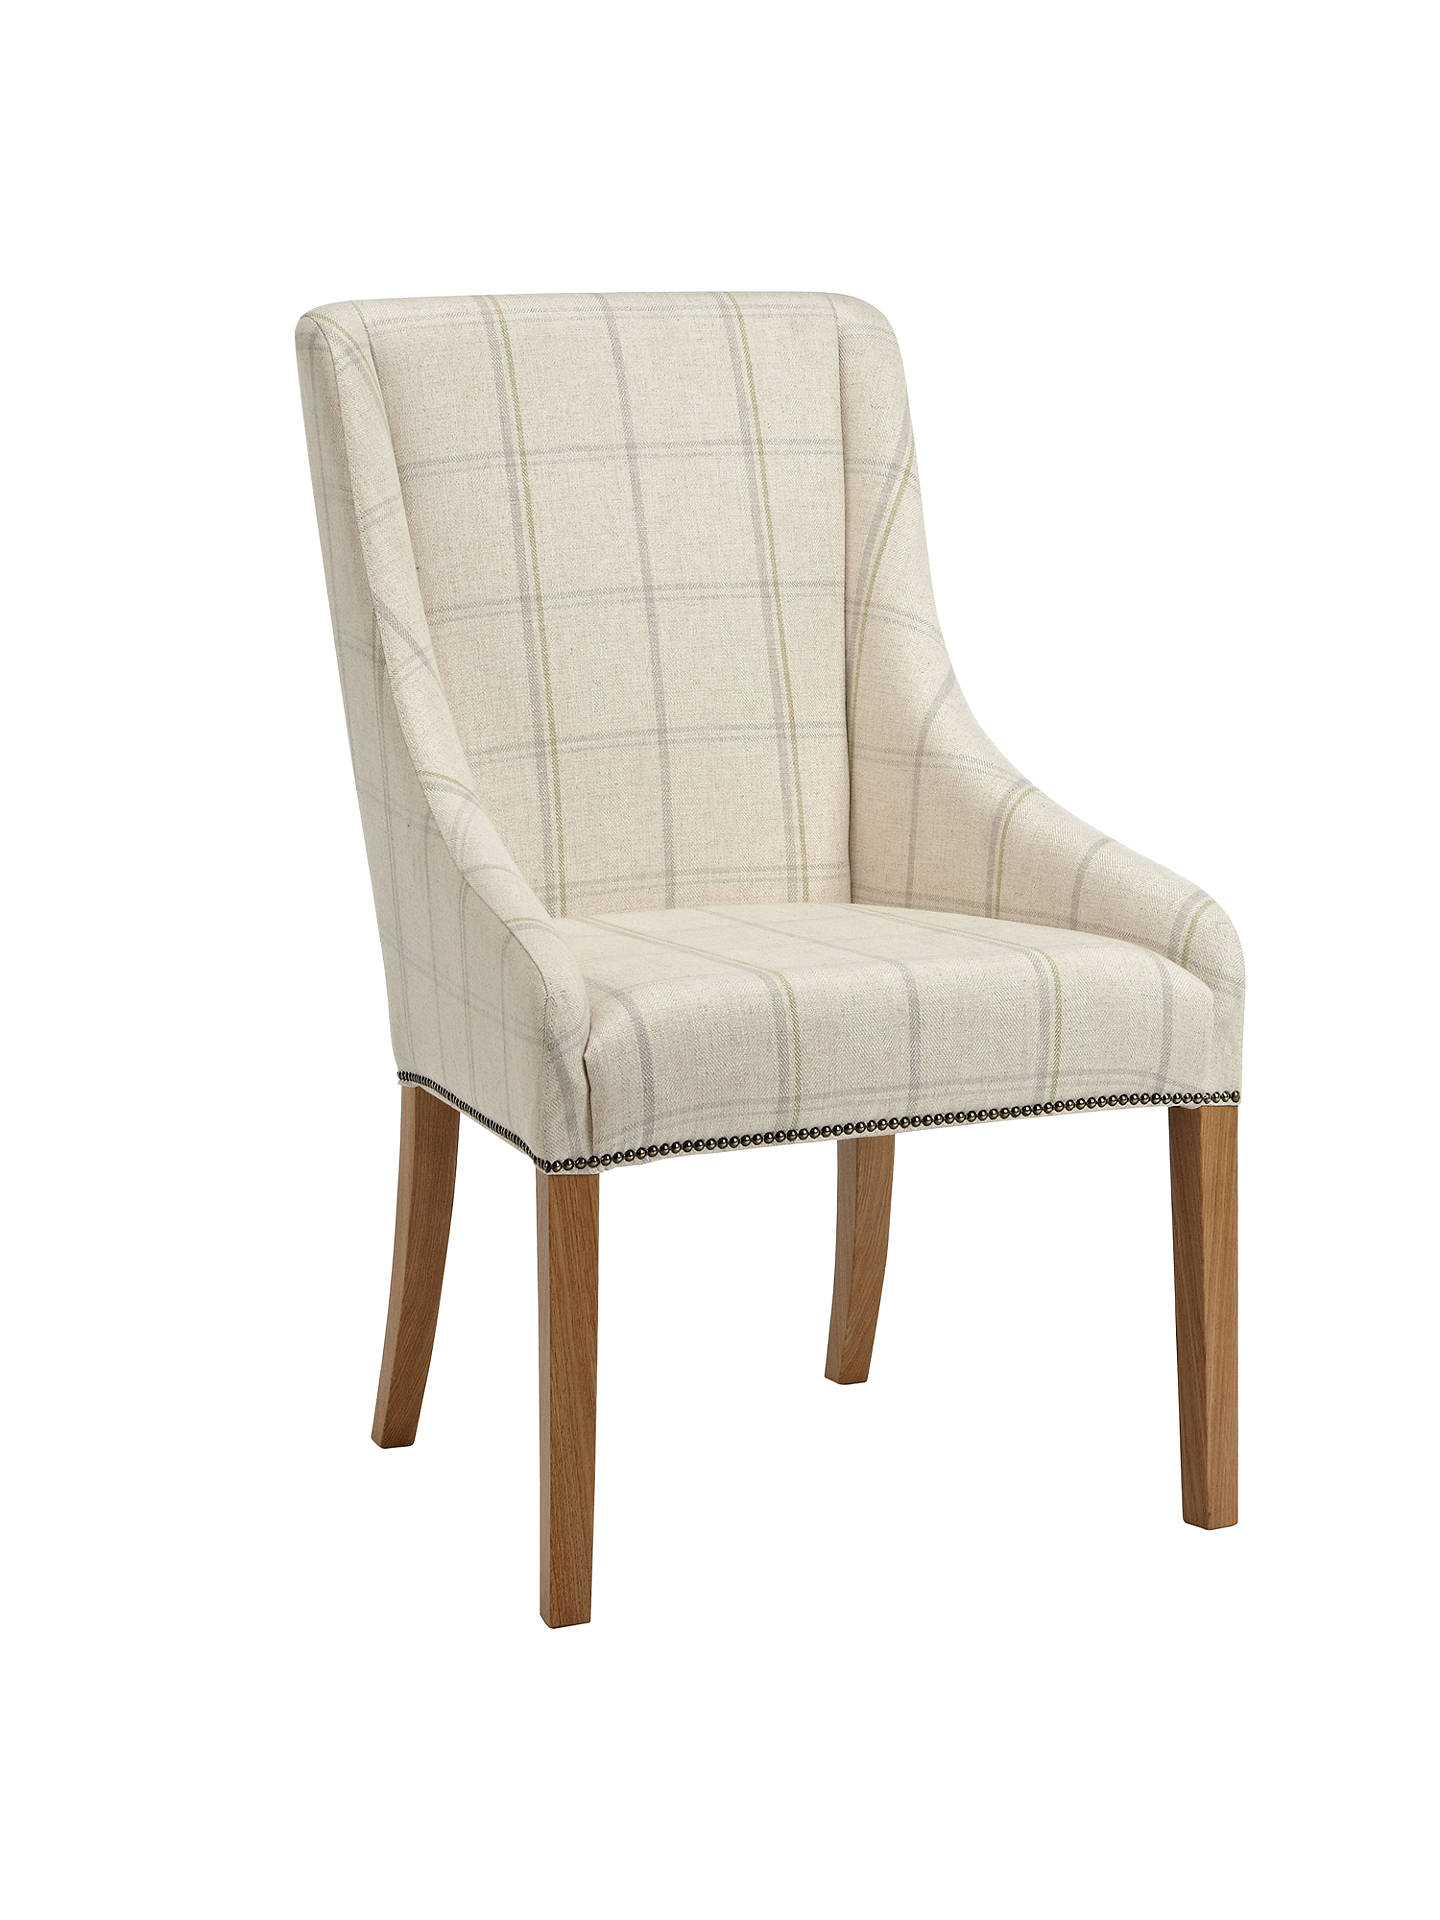 Modern Accent Chairs Uk John Lewis for Small Space